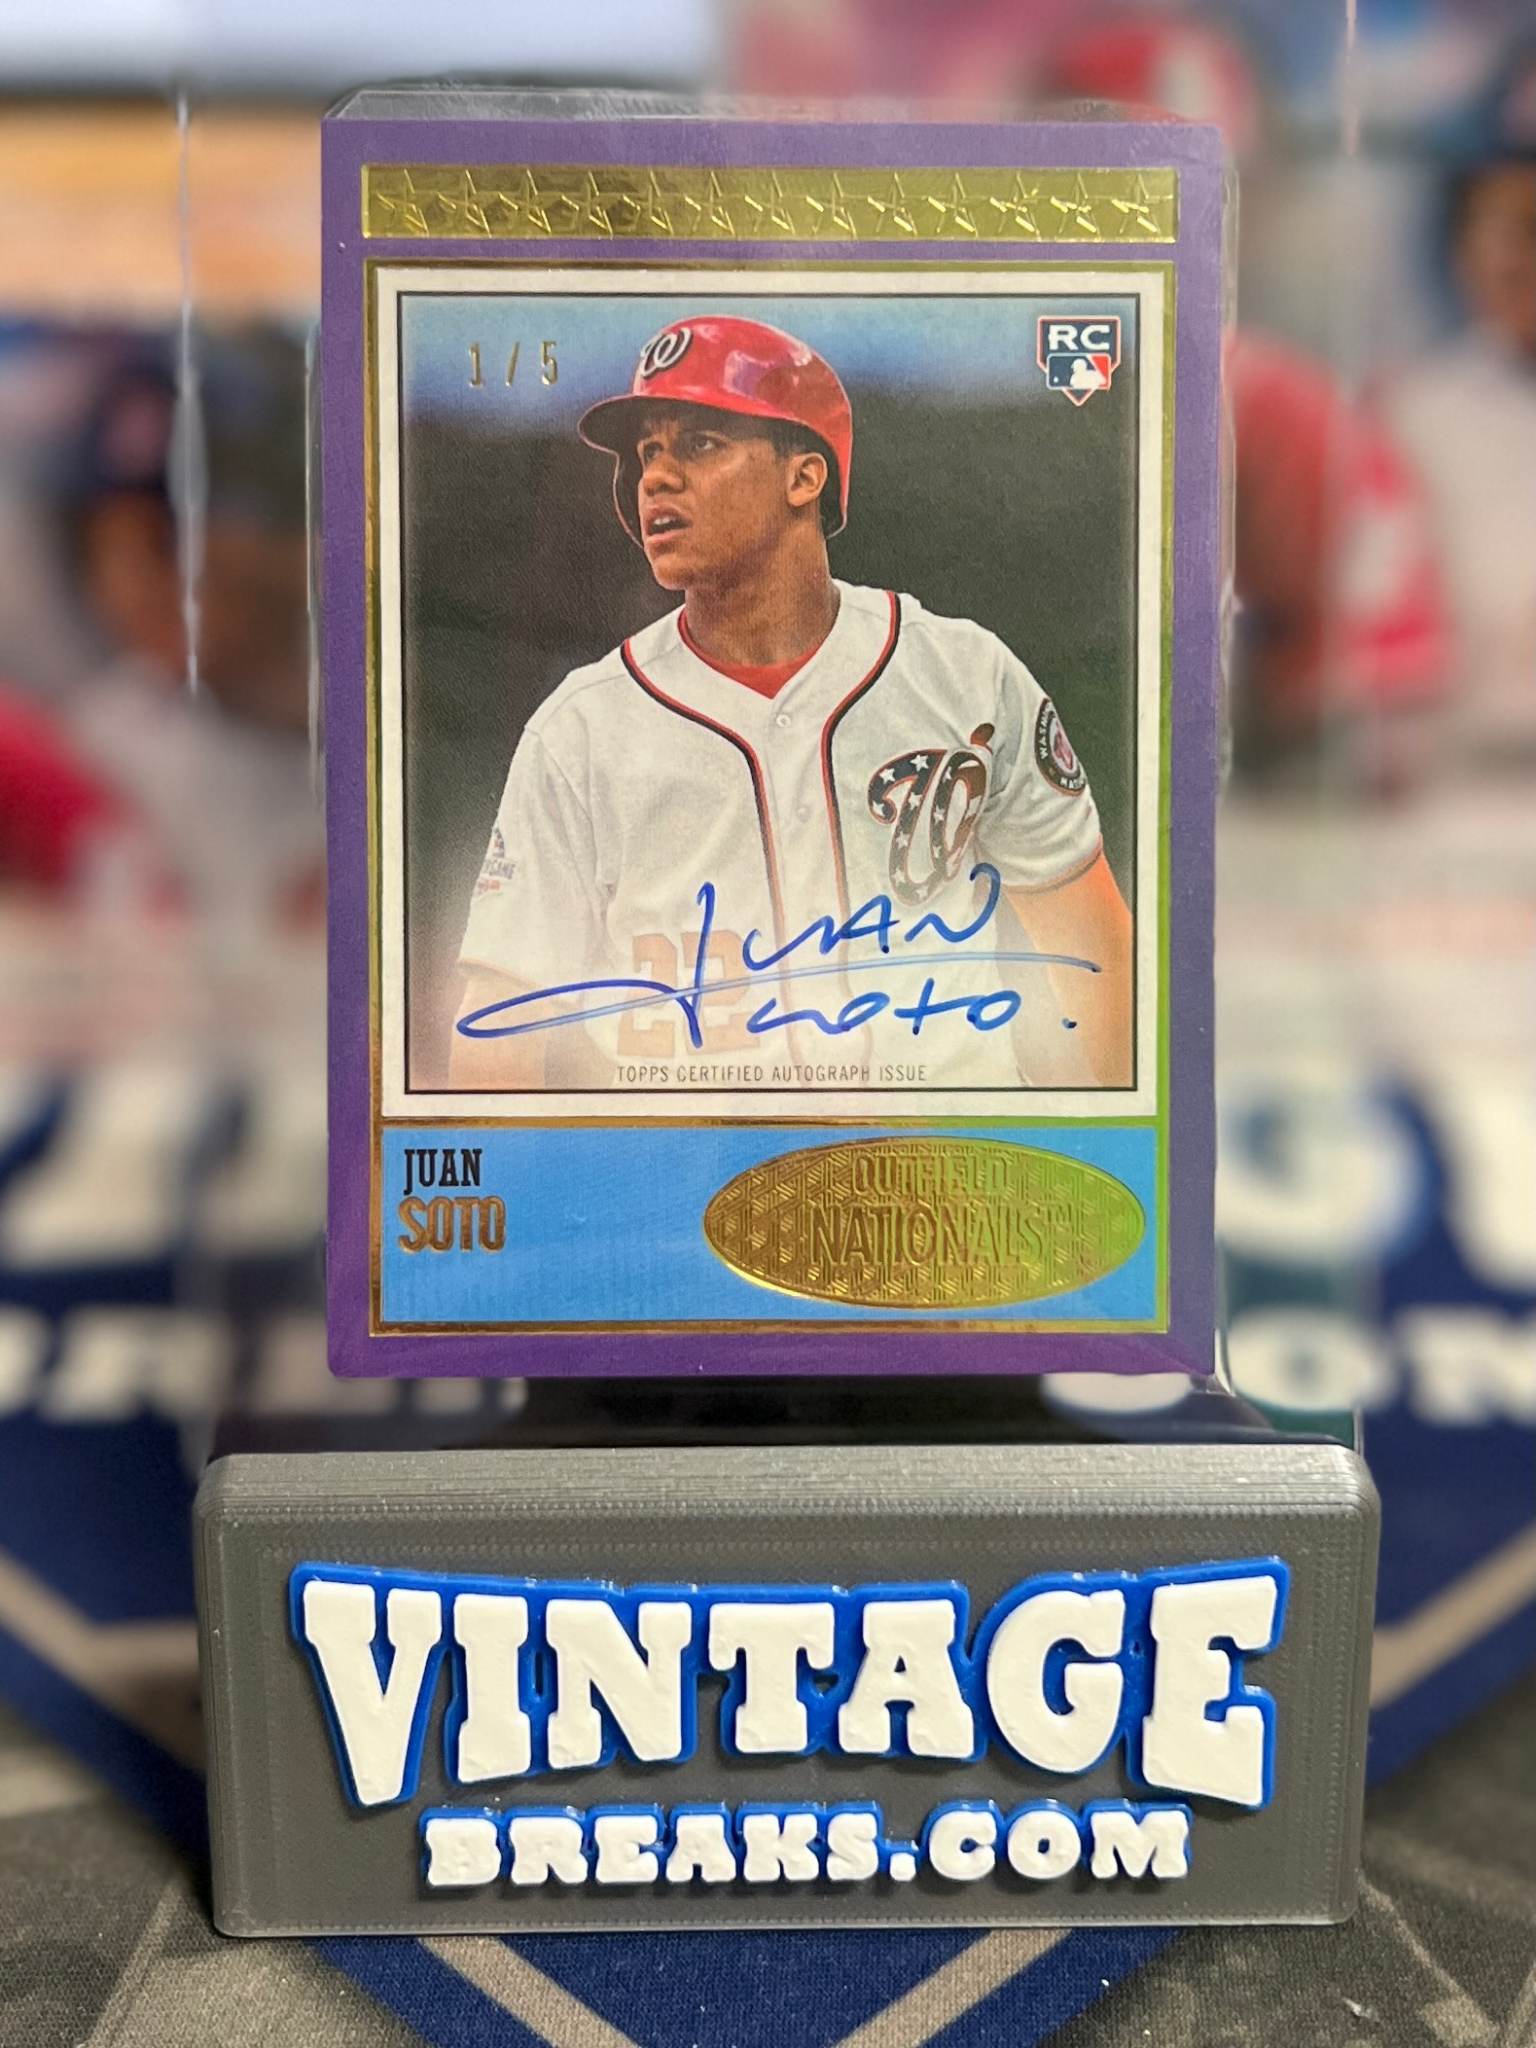 Rare Juan Soto 2018 Topps Brooklyn Rookie Auto Pulled by Vintage Breaks